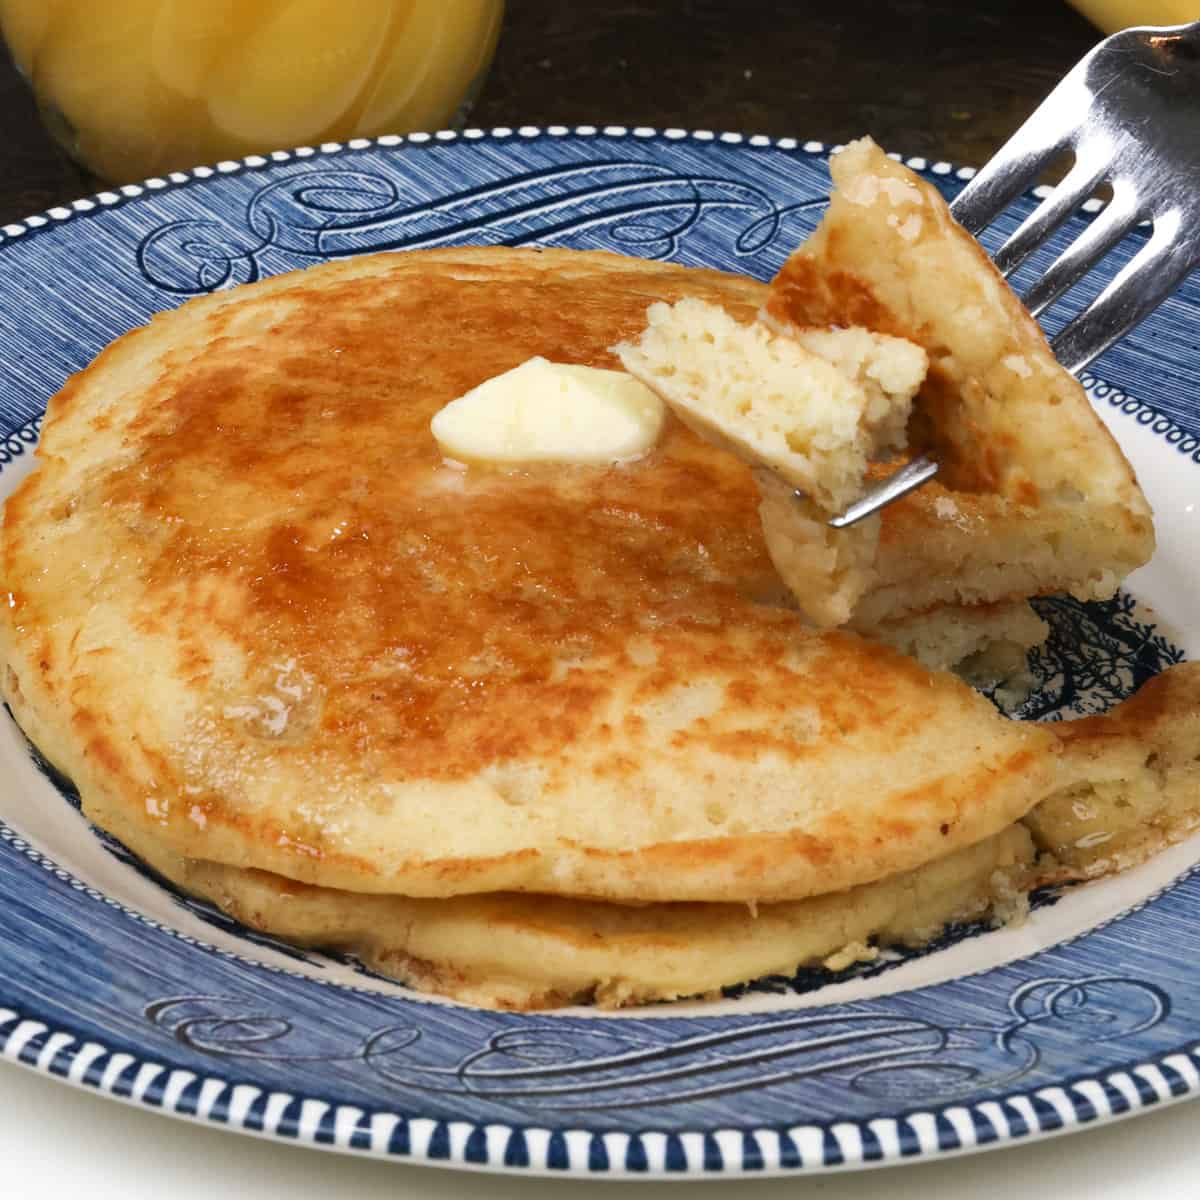 two pancakes with a fork filled with a piece of pancake on a blue plate resting on a silver tray